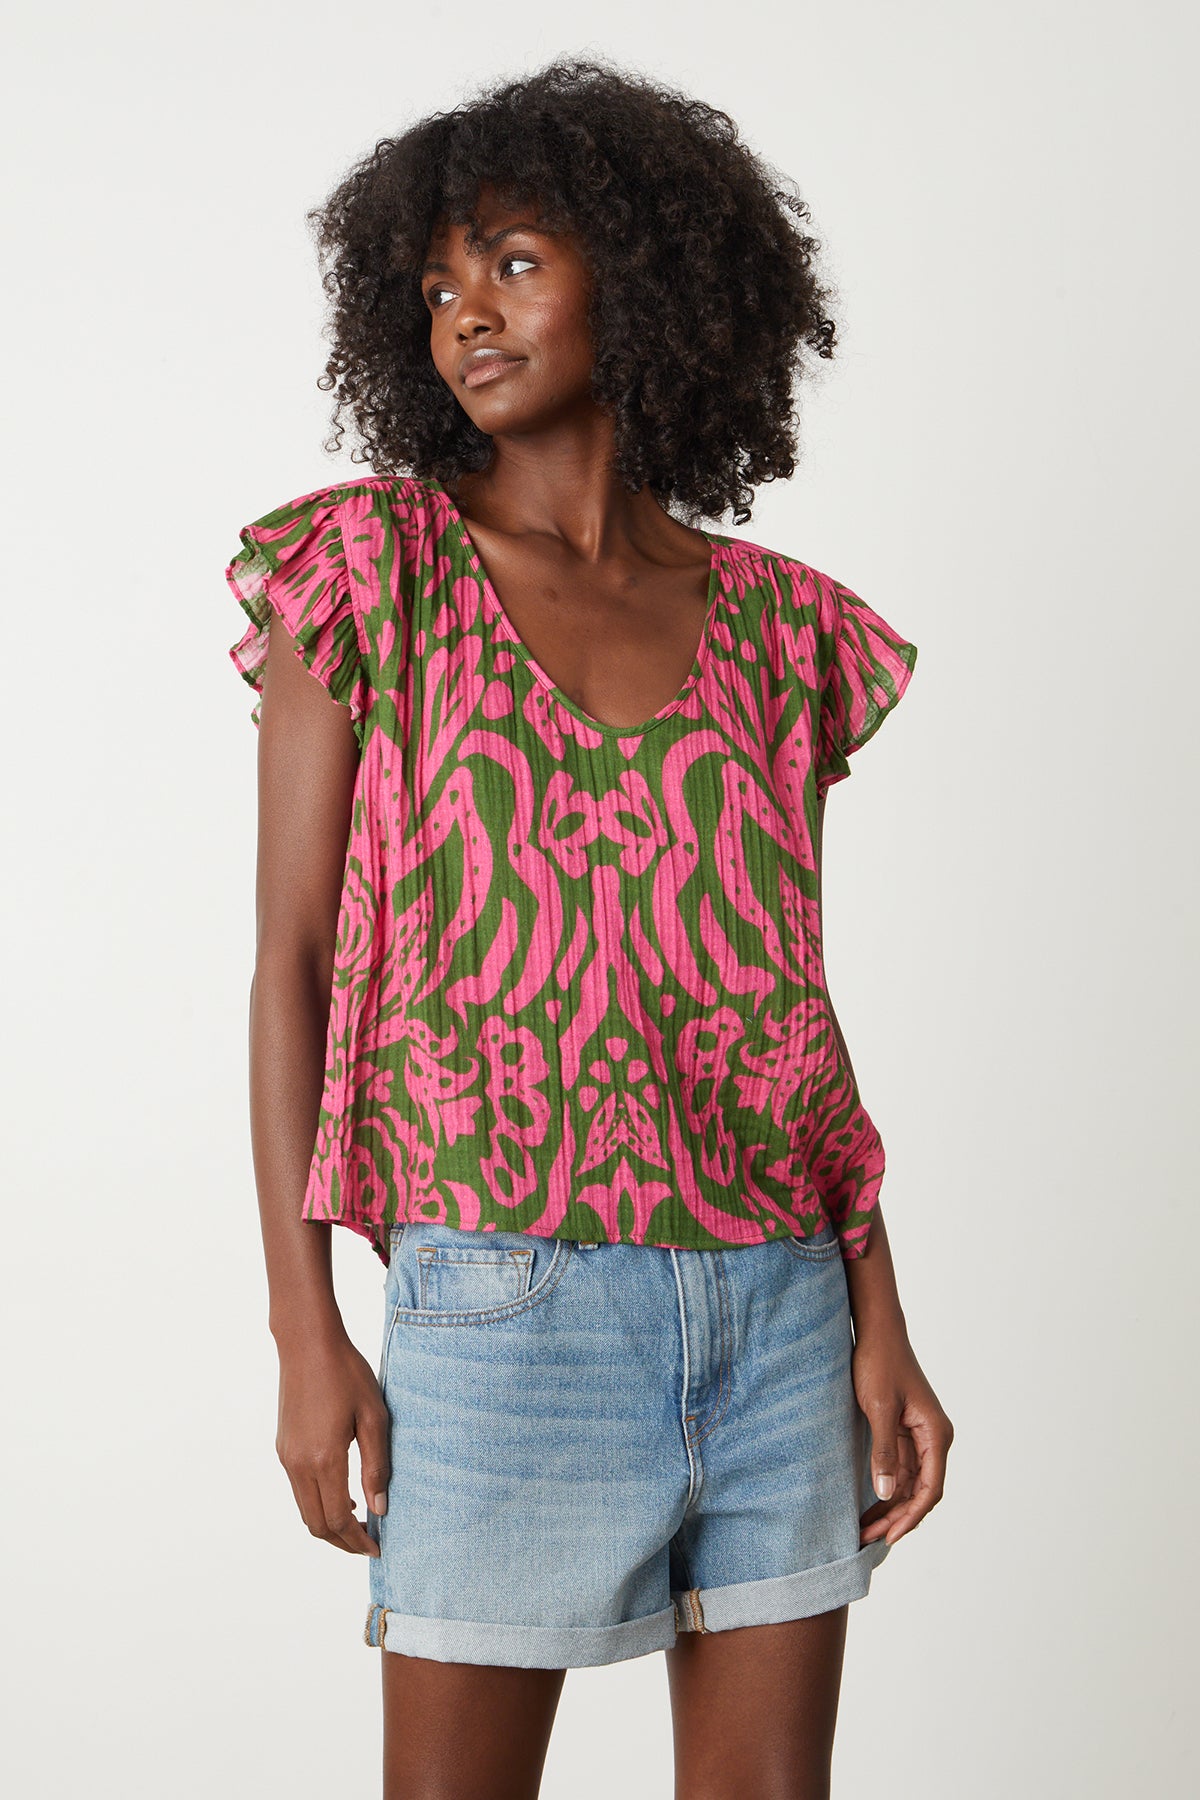 The model is wearing a Velvet by Graham & Spencer ALEAH PRINTED COTTON GAUZE TOP with ruffles.-26864184164545